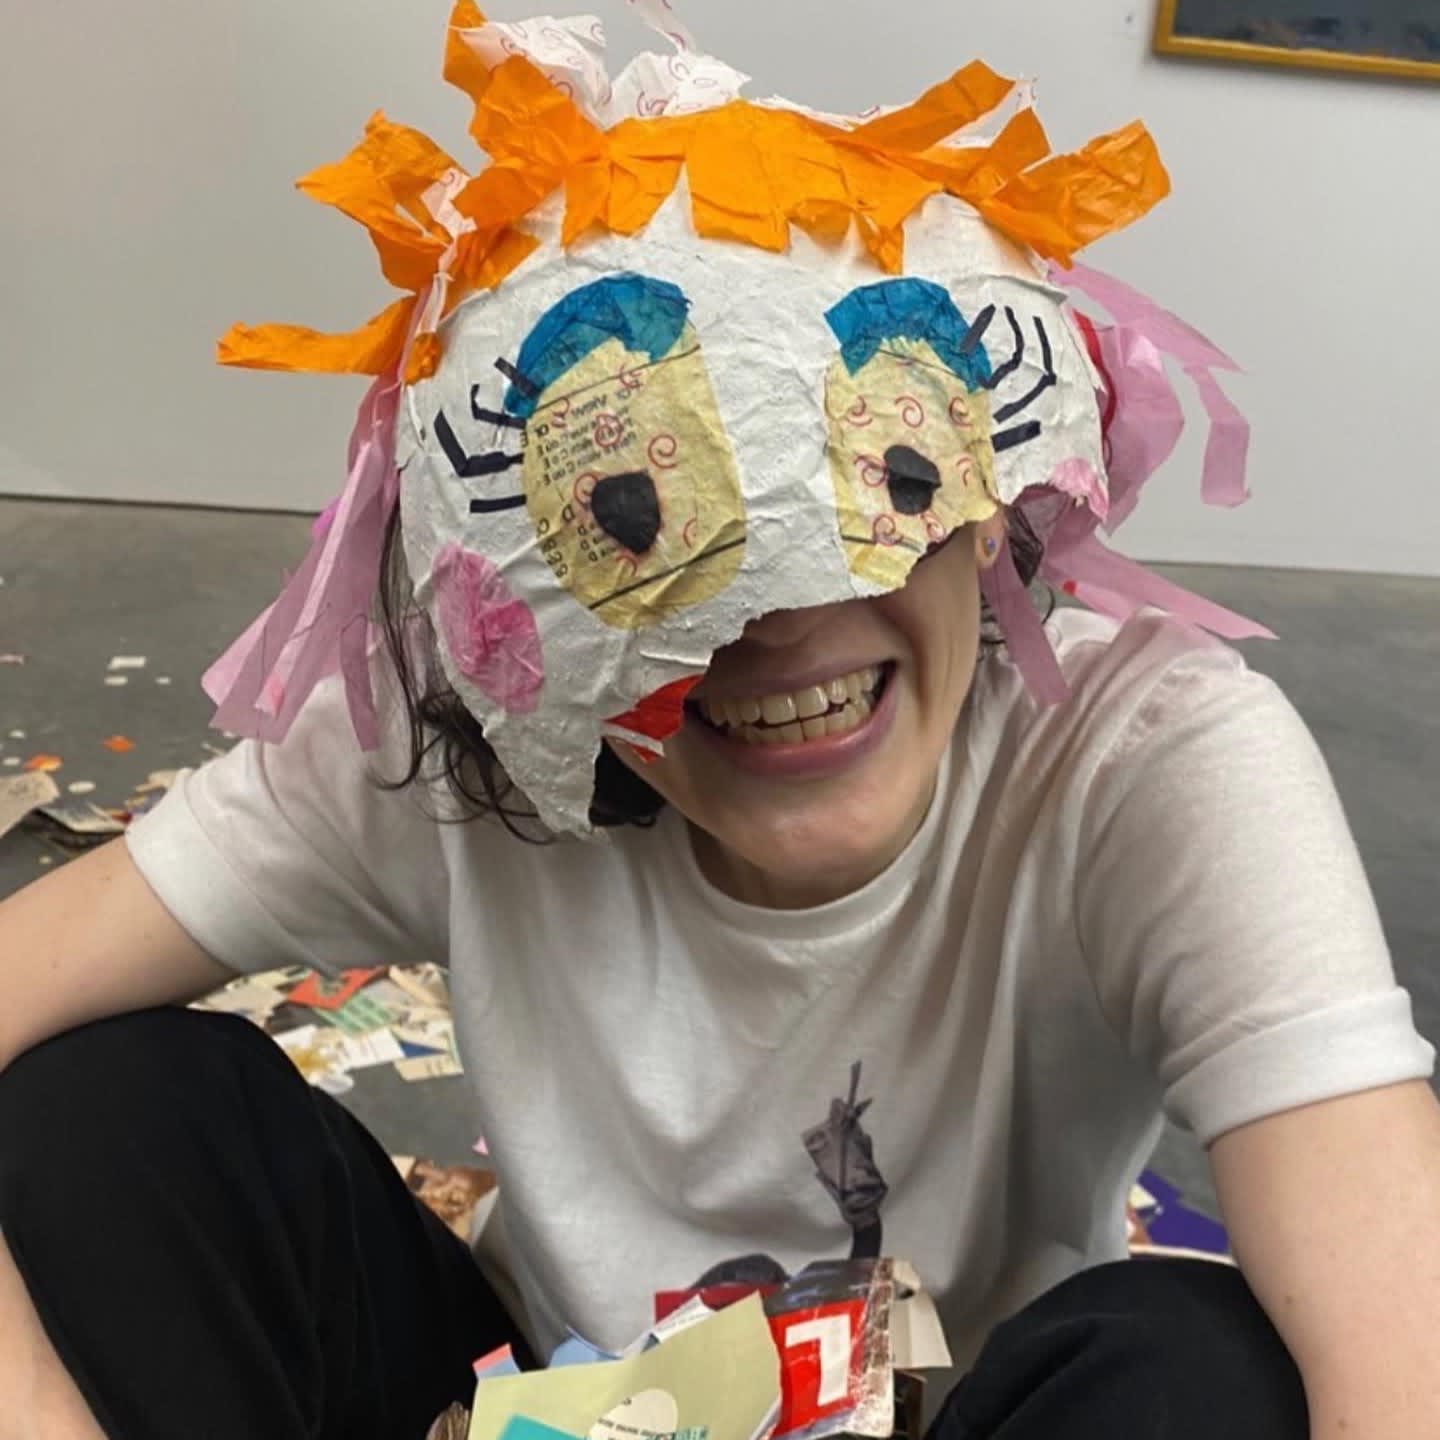 A white woman sits with a huge grin, most of her face obscured by the remains of a pinata worn as a hat